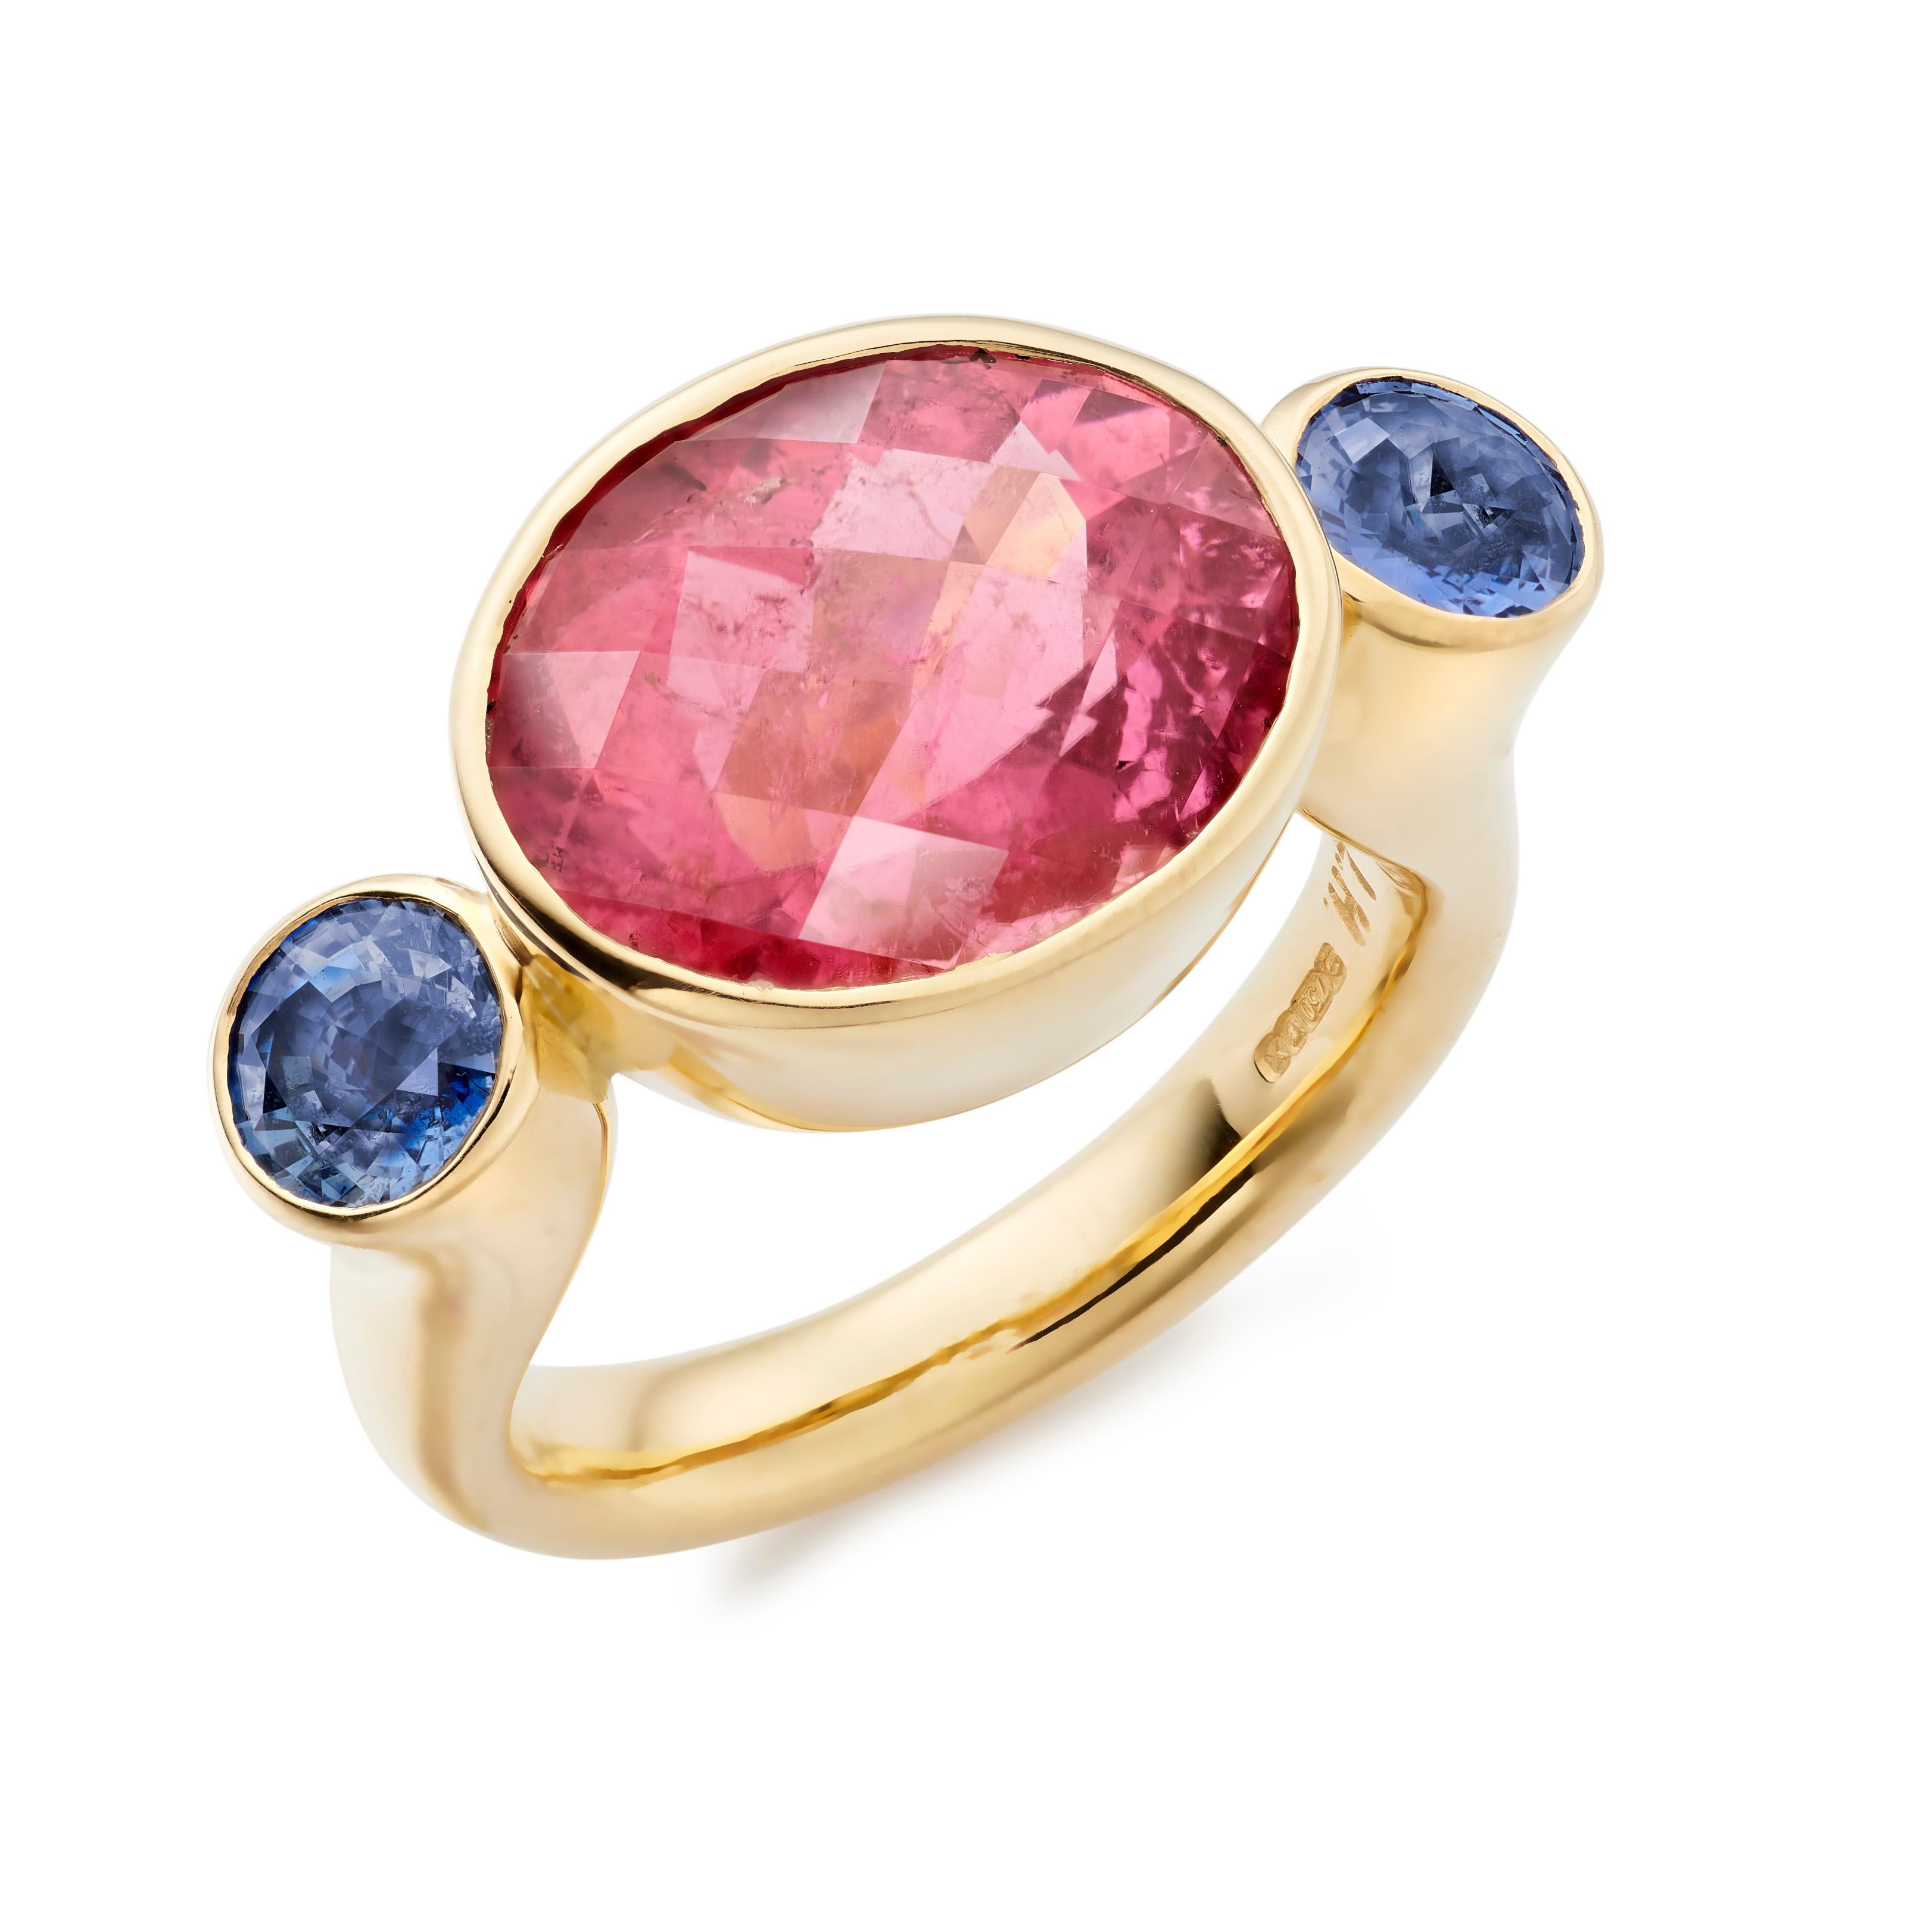 The Bon Bon is one of Lilly Hastedt's signature rings. The design on this ring follows the roundness of the gemstones. The central hot pink Tourmaline has a checkerboard faceted cut and is paired with round Tanzanites. 

Although they are not from